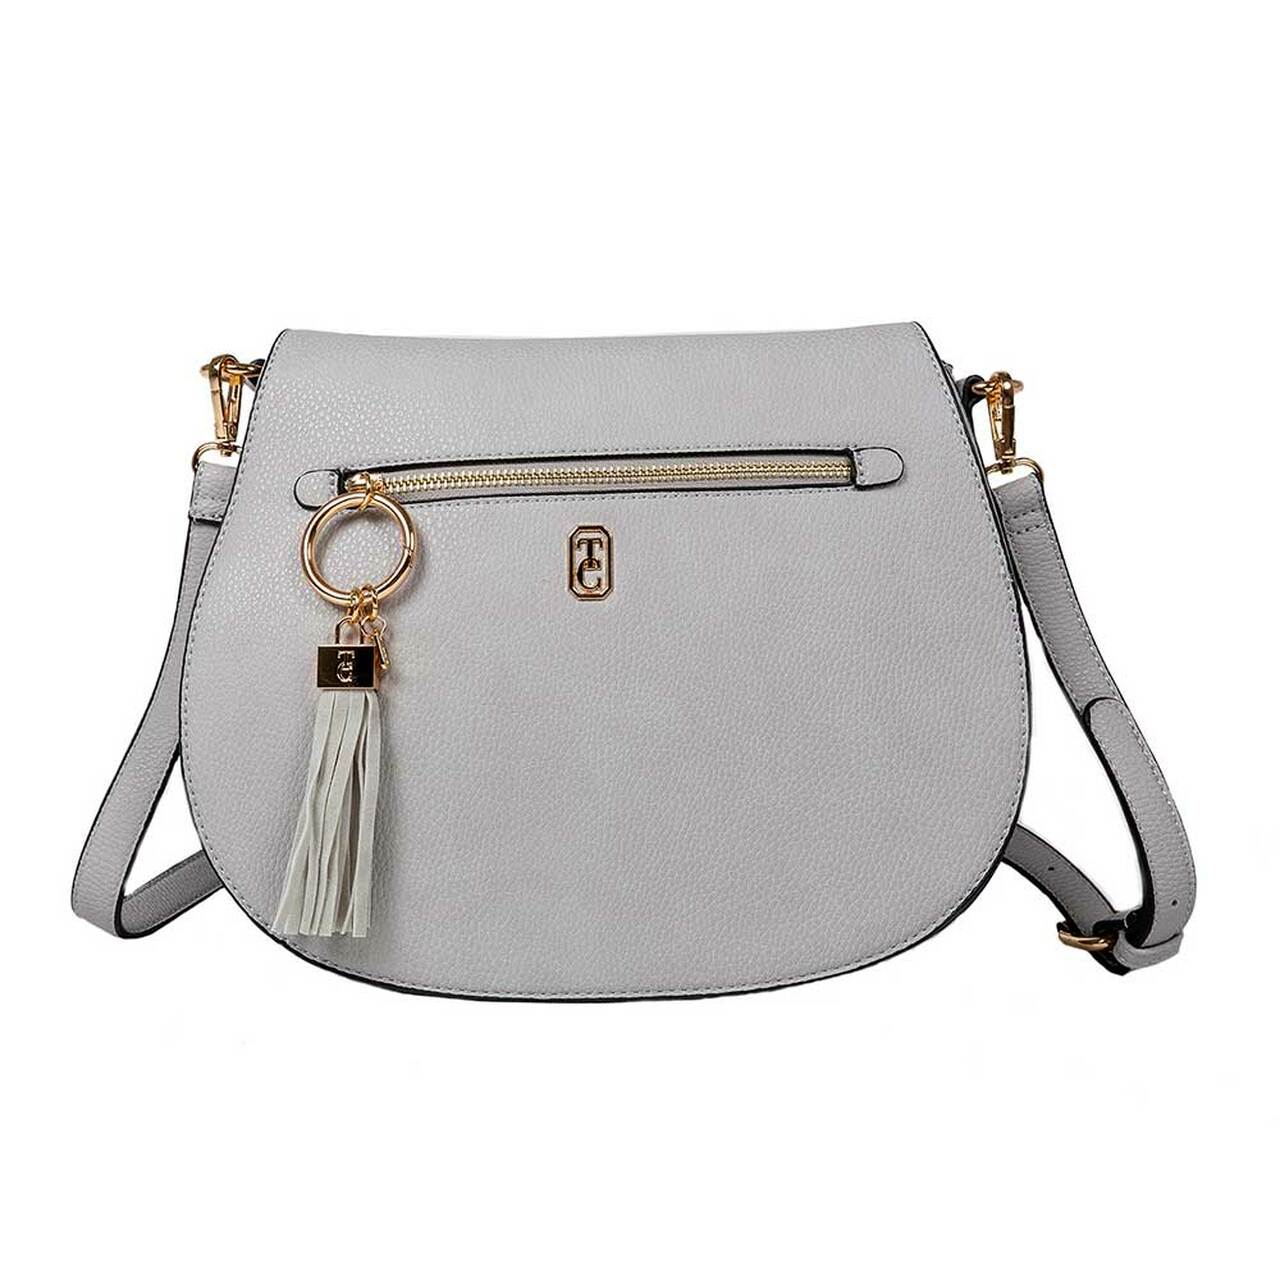 Tipperary Crystal Savoy Large Satchel Bag Grey (Yellow gold hardware)  This stylish new addition to our bag collection is proving to be very popular, with an outside zip compartment the Savoy bag is stylish and functional. Metal hardware detail finish off this amazing bag in rose gold or yellow gold. The Savoy satchel style bag can be worn over the shoulder or as a cross body bag.